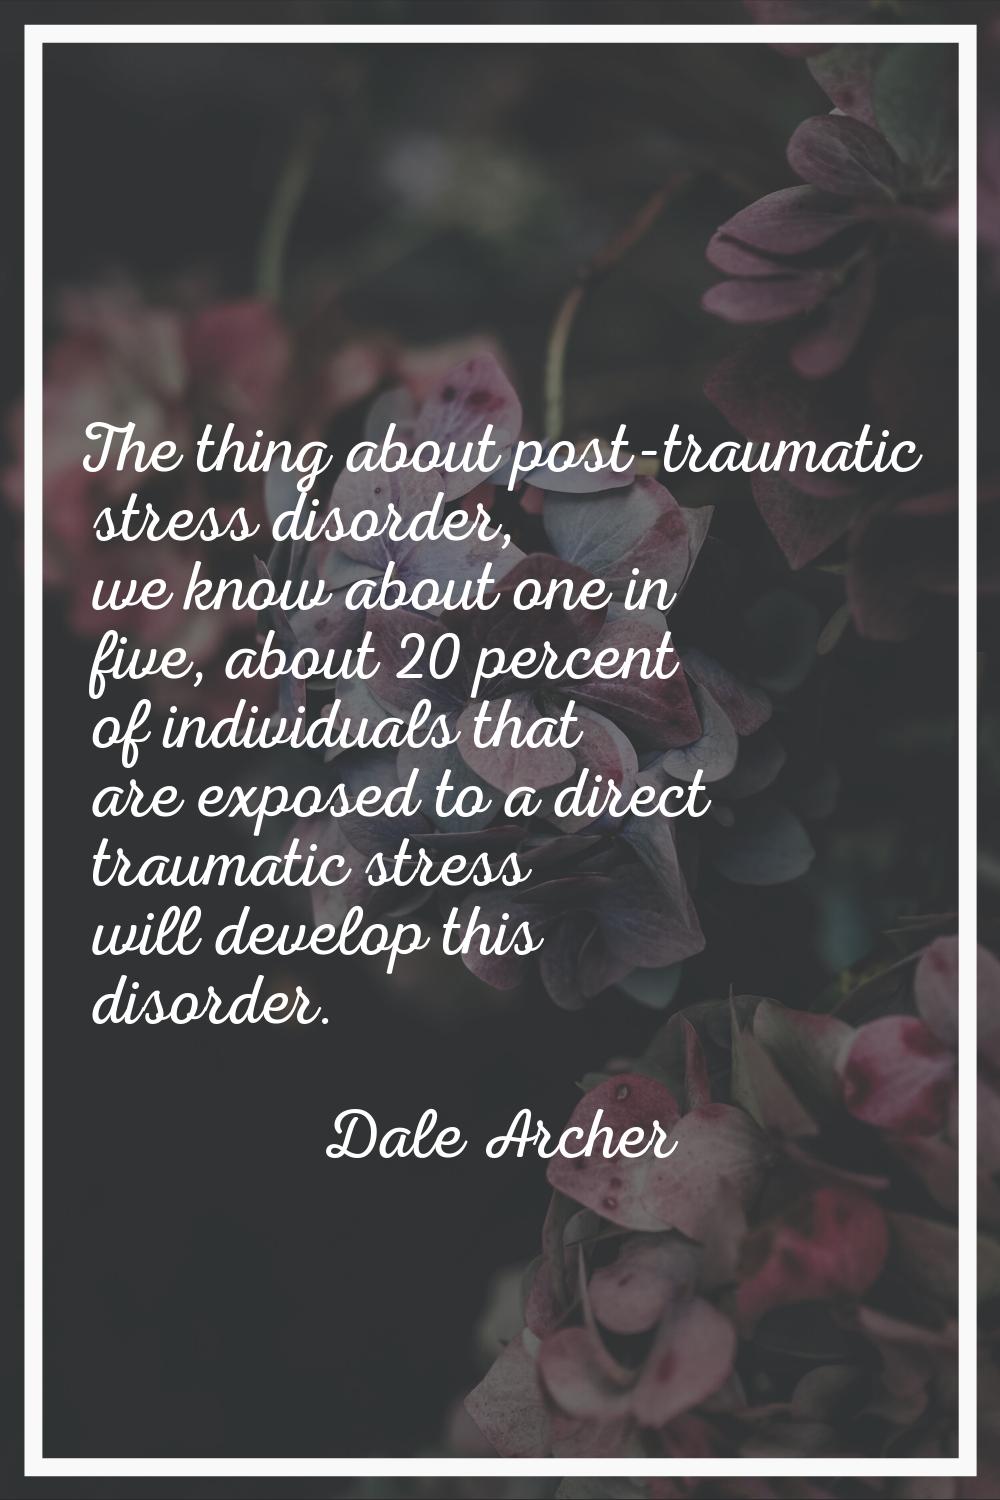 The thing about post-traumatic stress disorder, we know about one in five, about 20 percent of indi